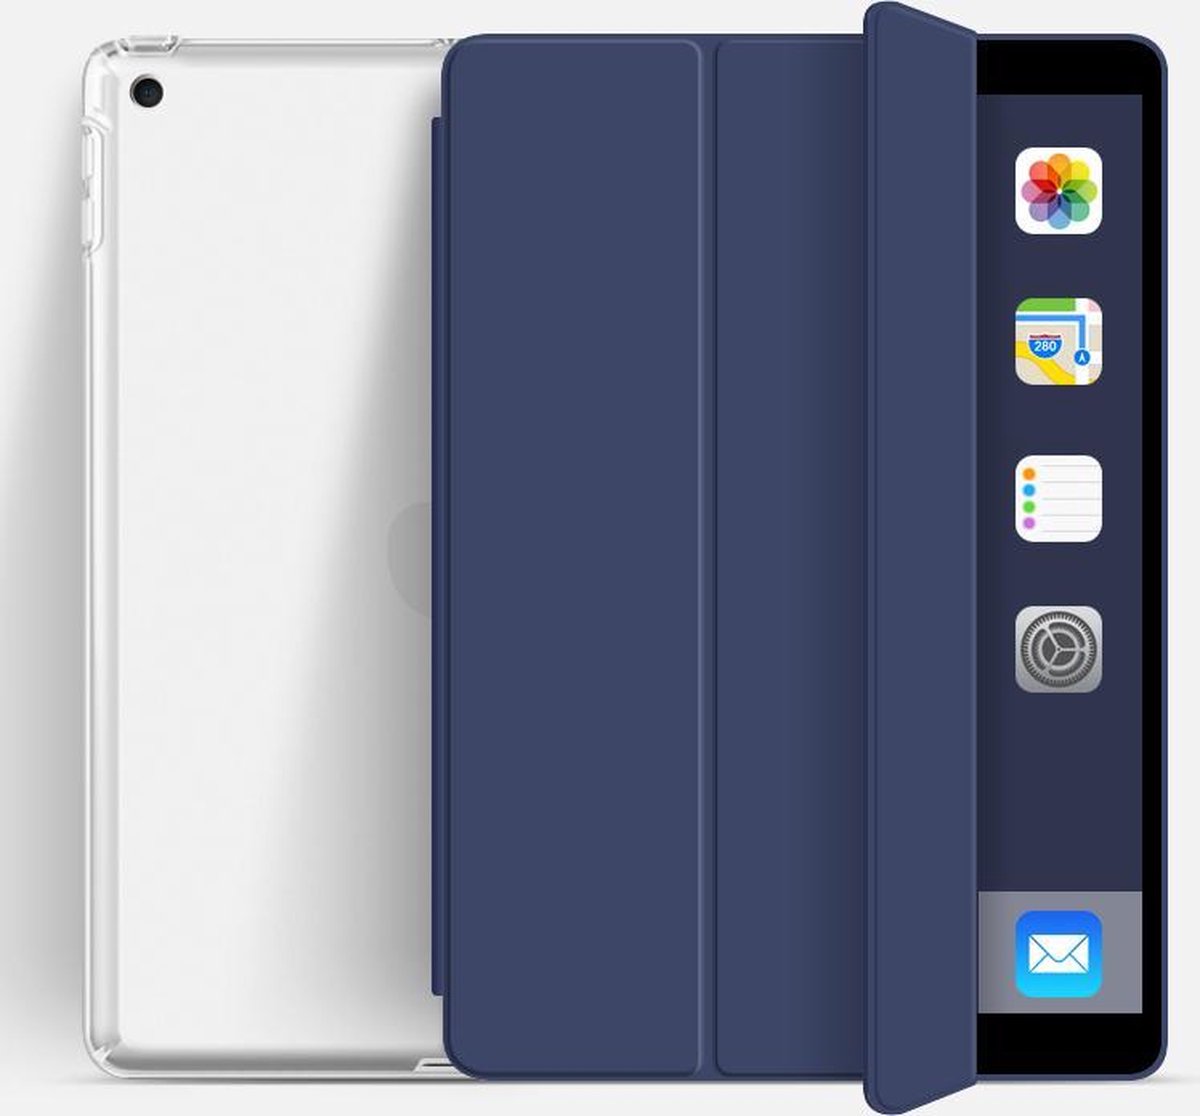 Ipad 5/6 transparant (2017/2018) - 9.7 inch – Ipad hoes – soft cover – Hoes voor iPad – Tablet beschermer - navy